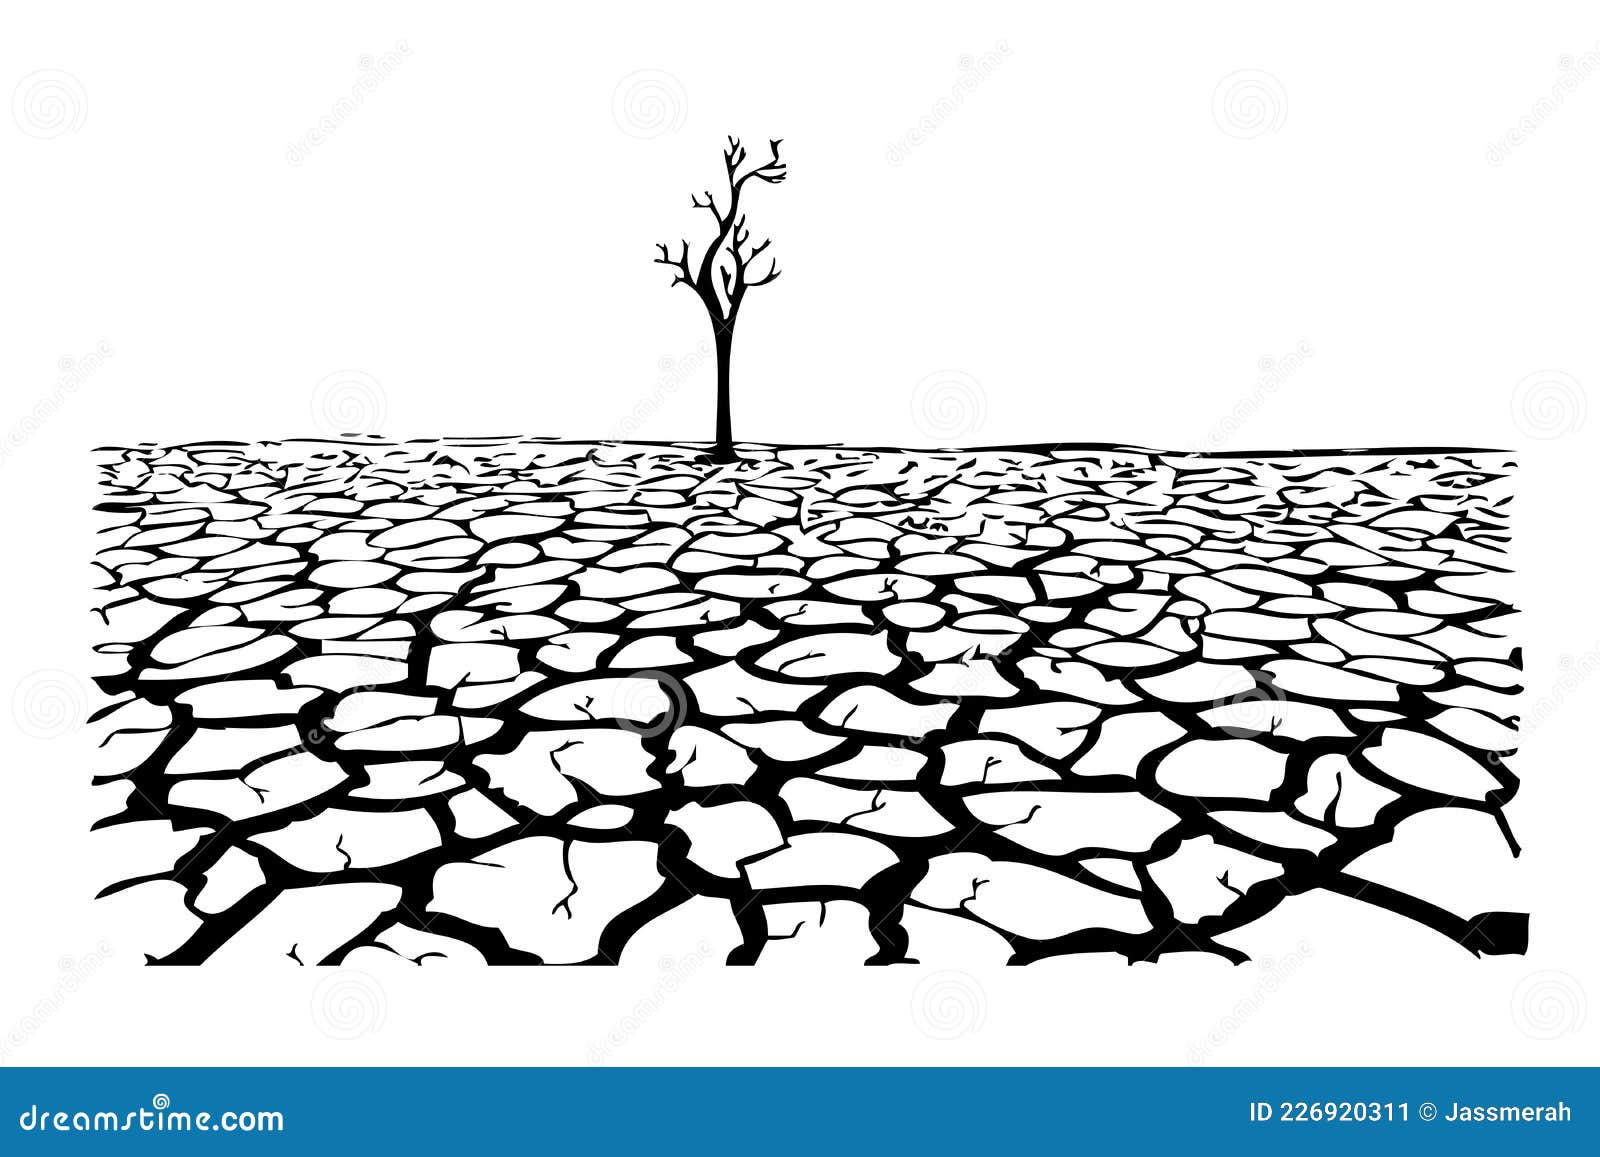 Manual Draw Sketch Crack Land Dead Stock Vector (Royalty Free) 2022425777 |  Shutterstock